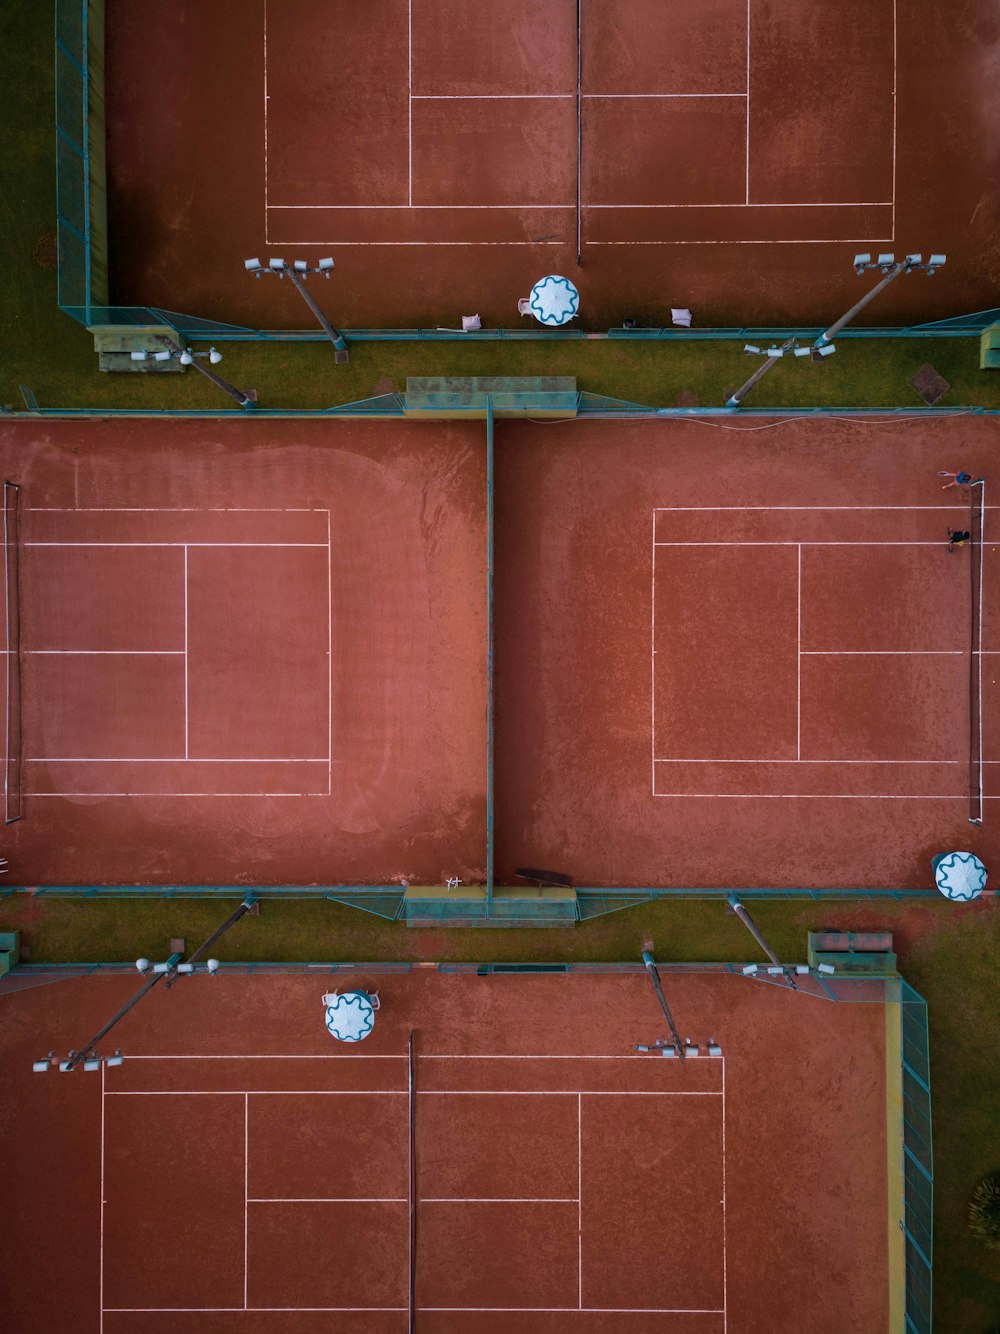 aerial view of four tennis courts